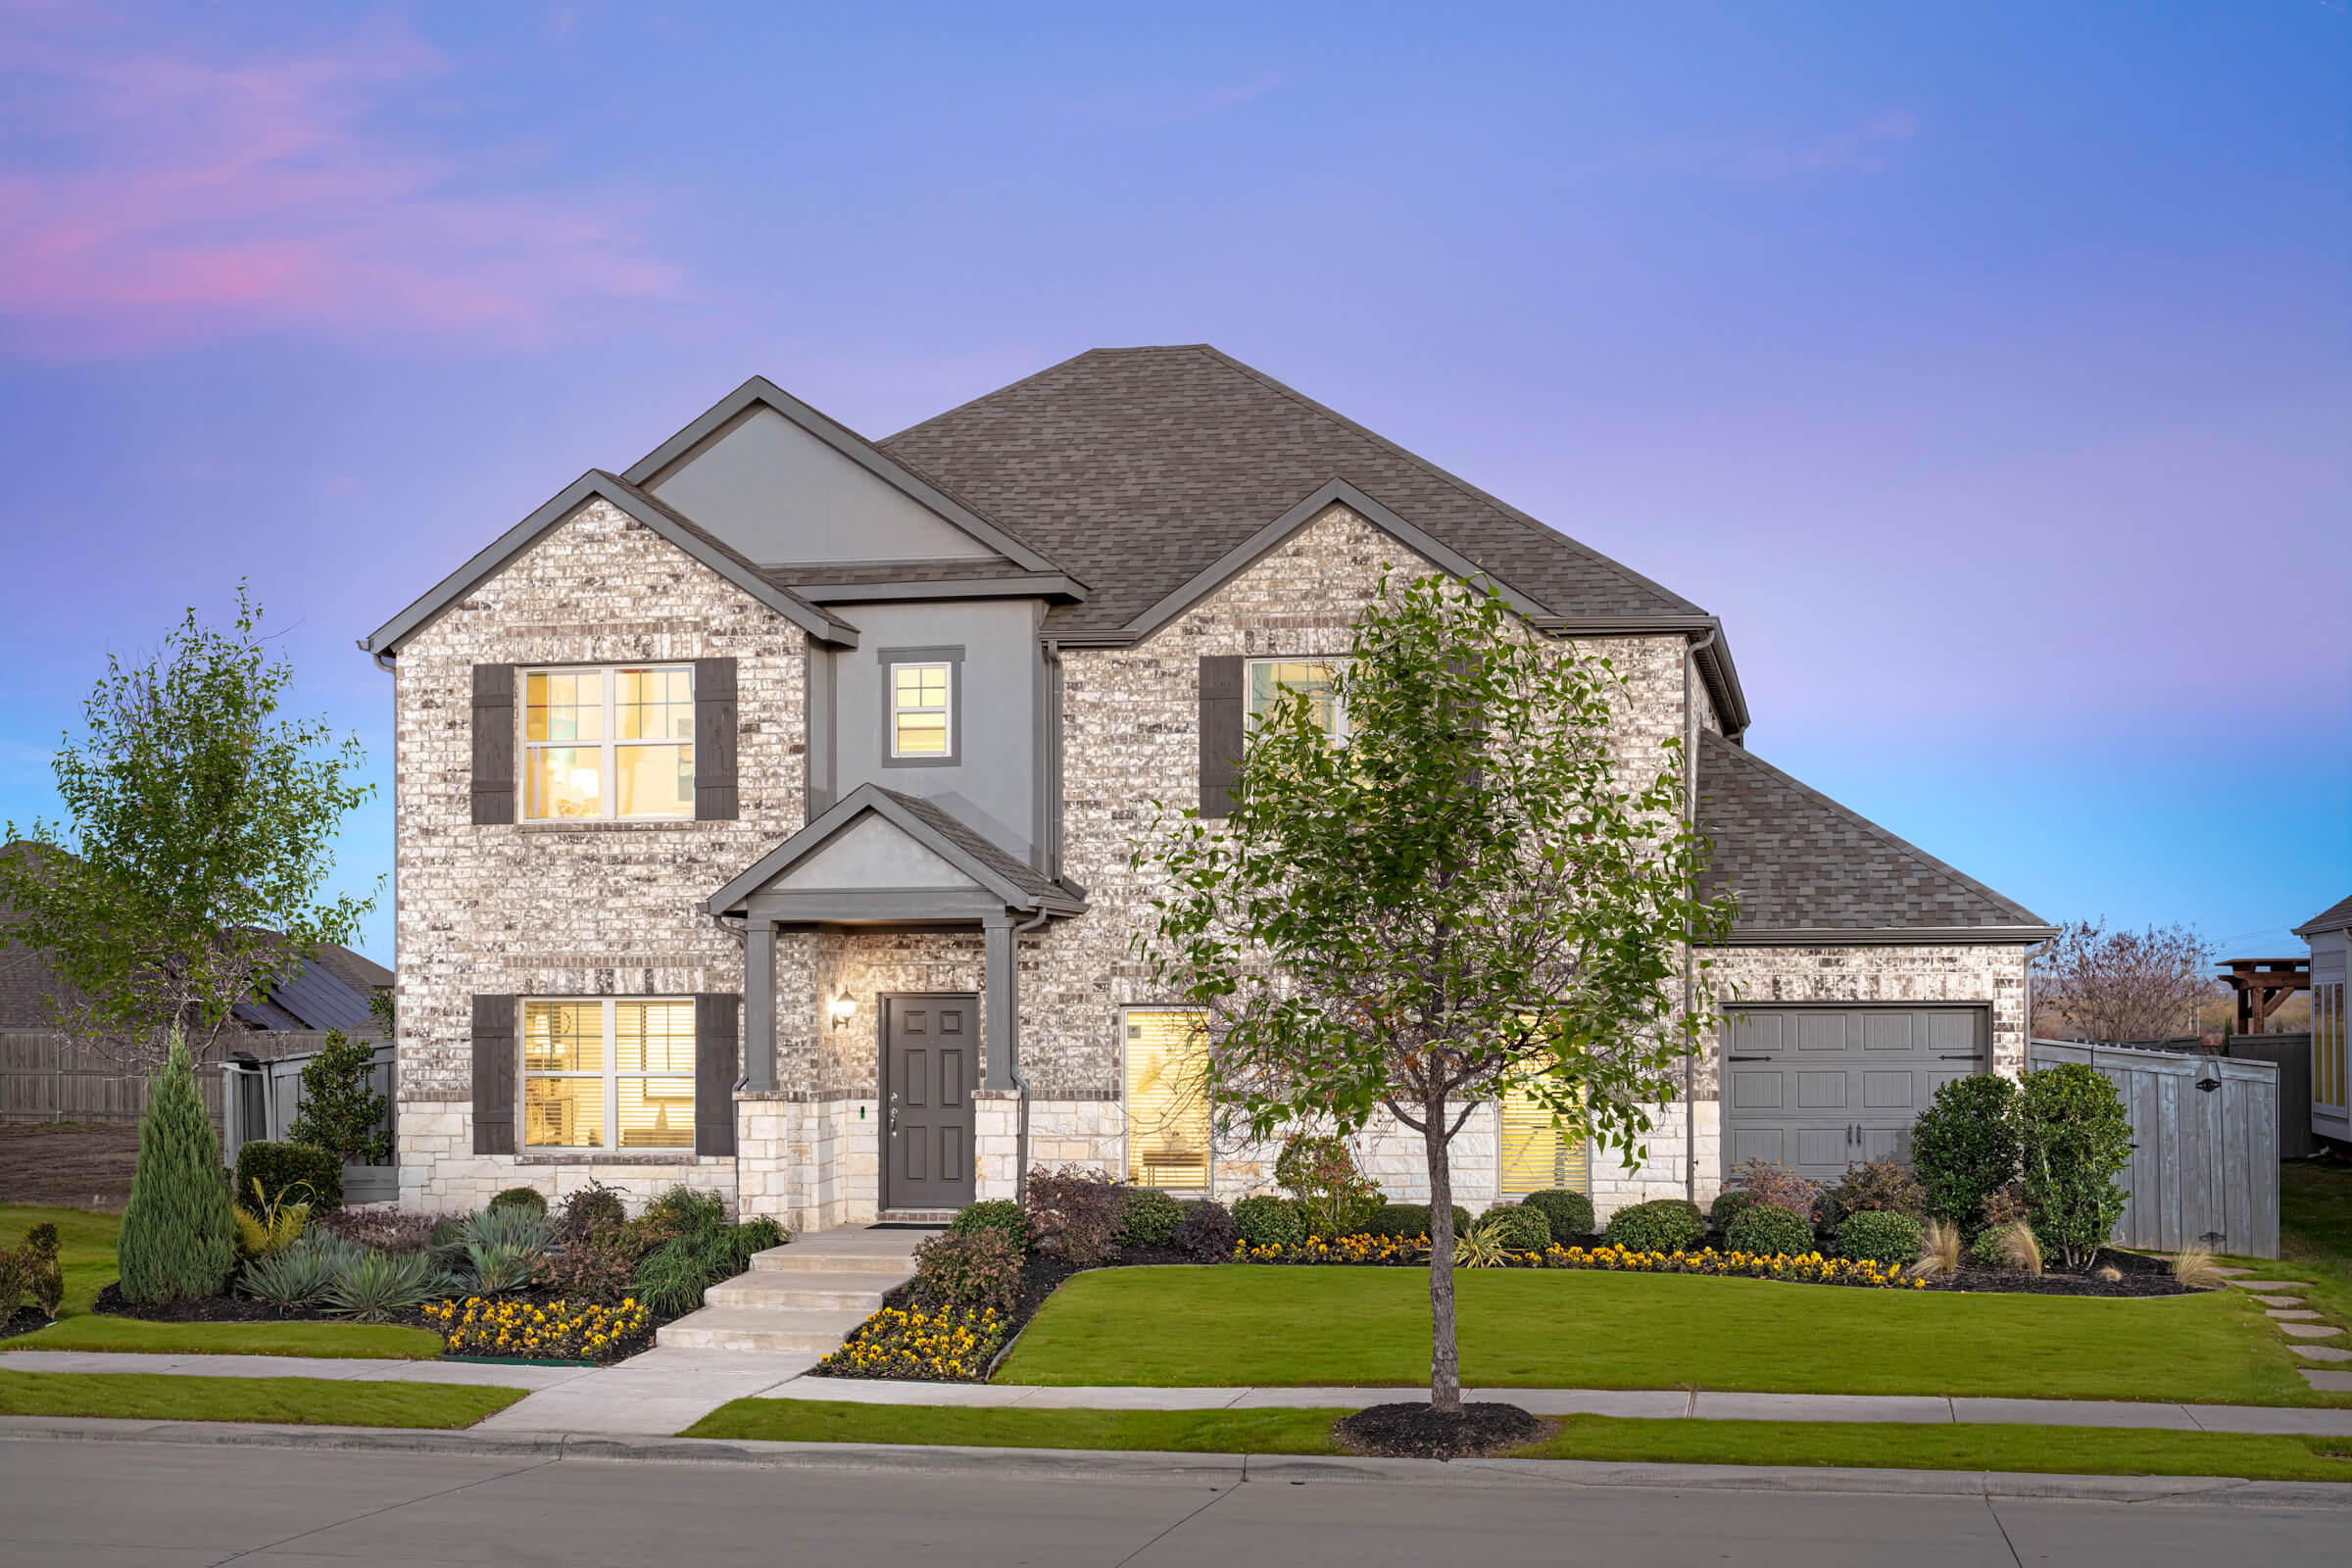 Two-story suburban home with stone facade at twilight in new home communities in Mansfield TX.